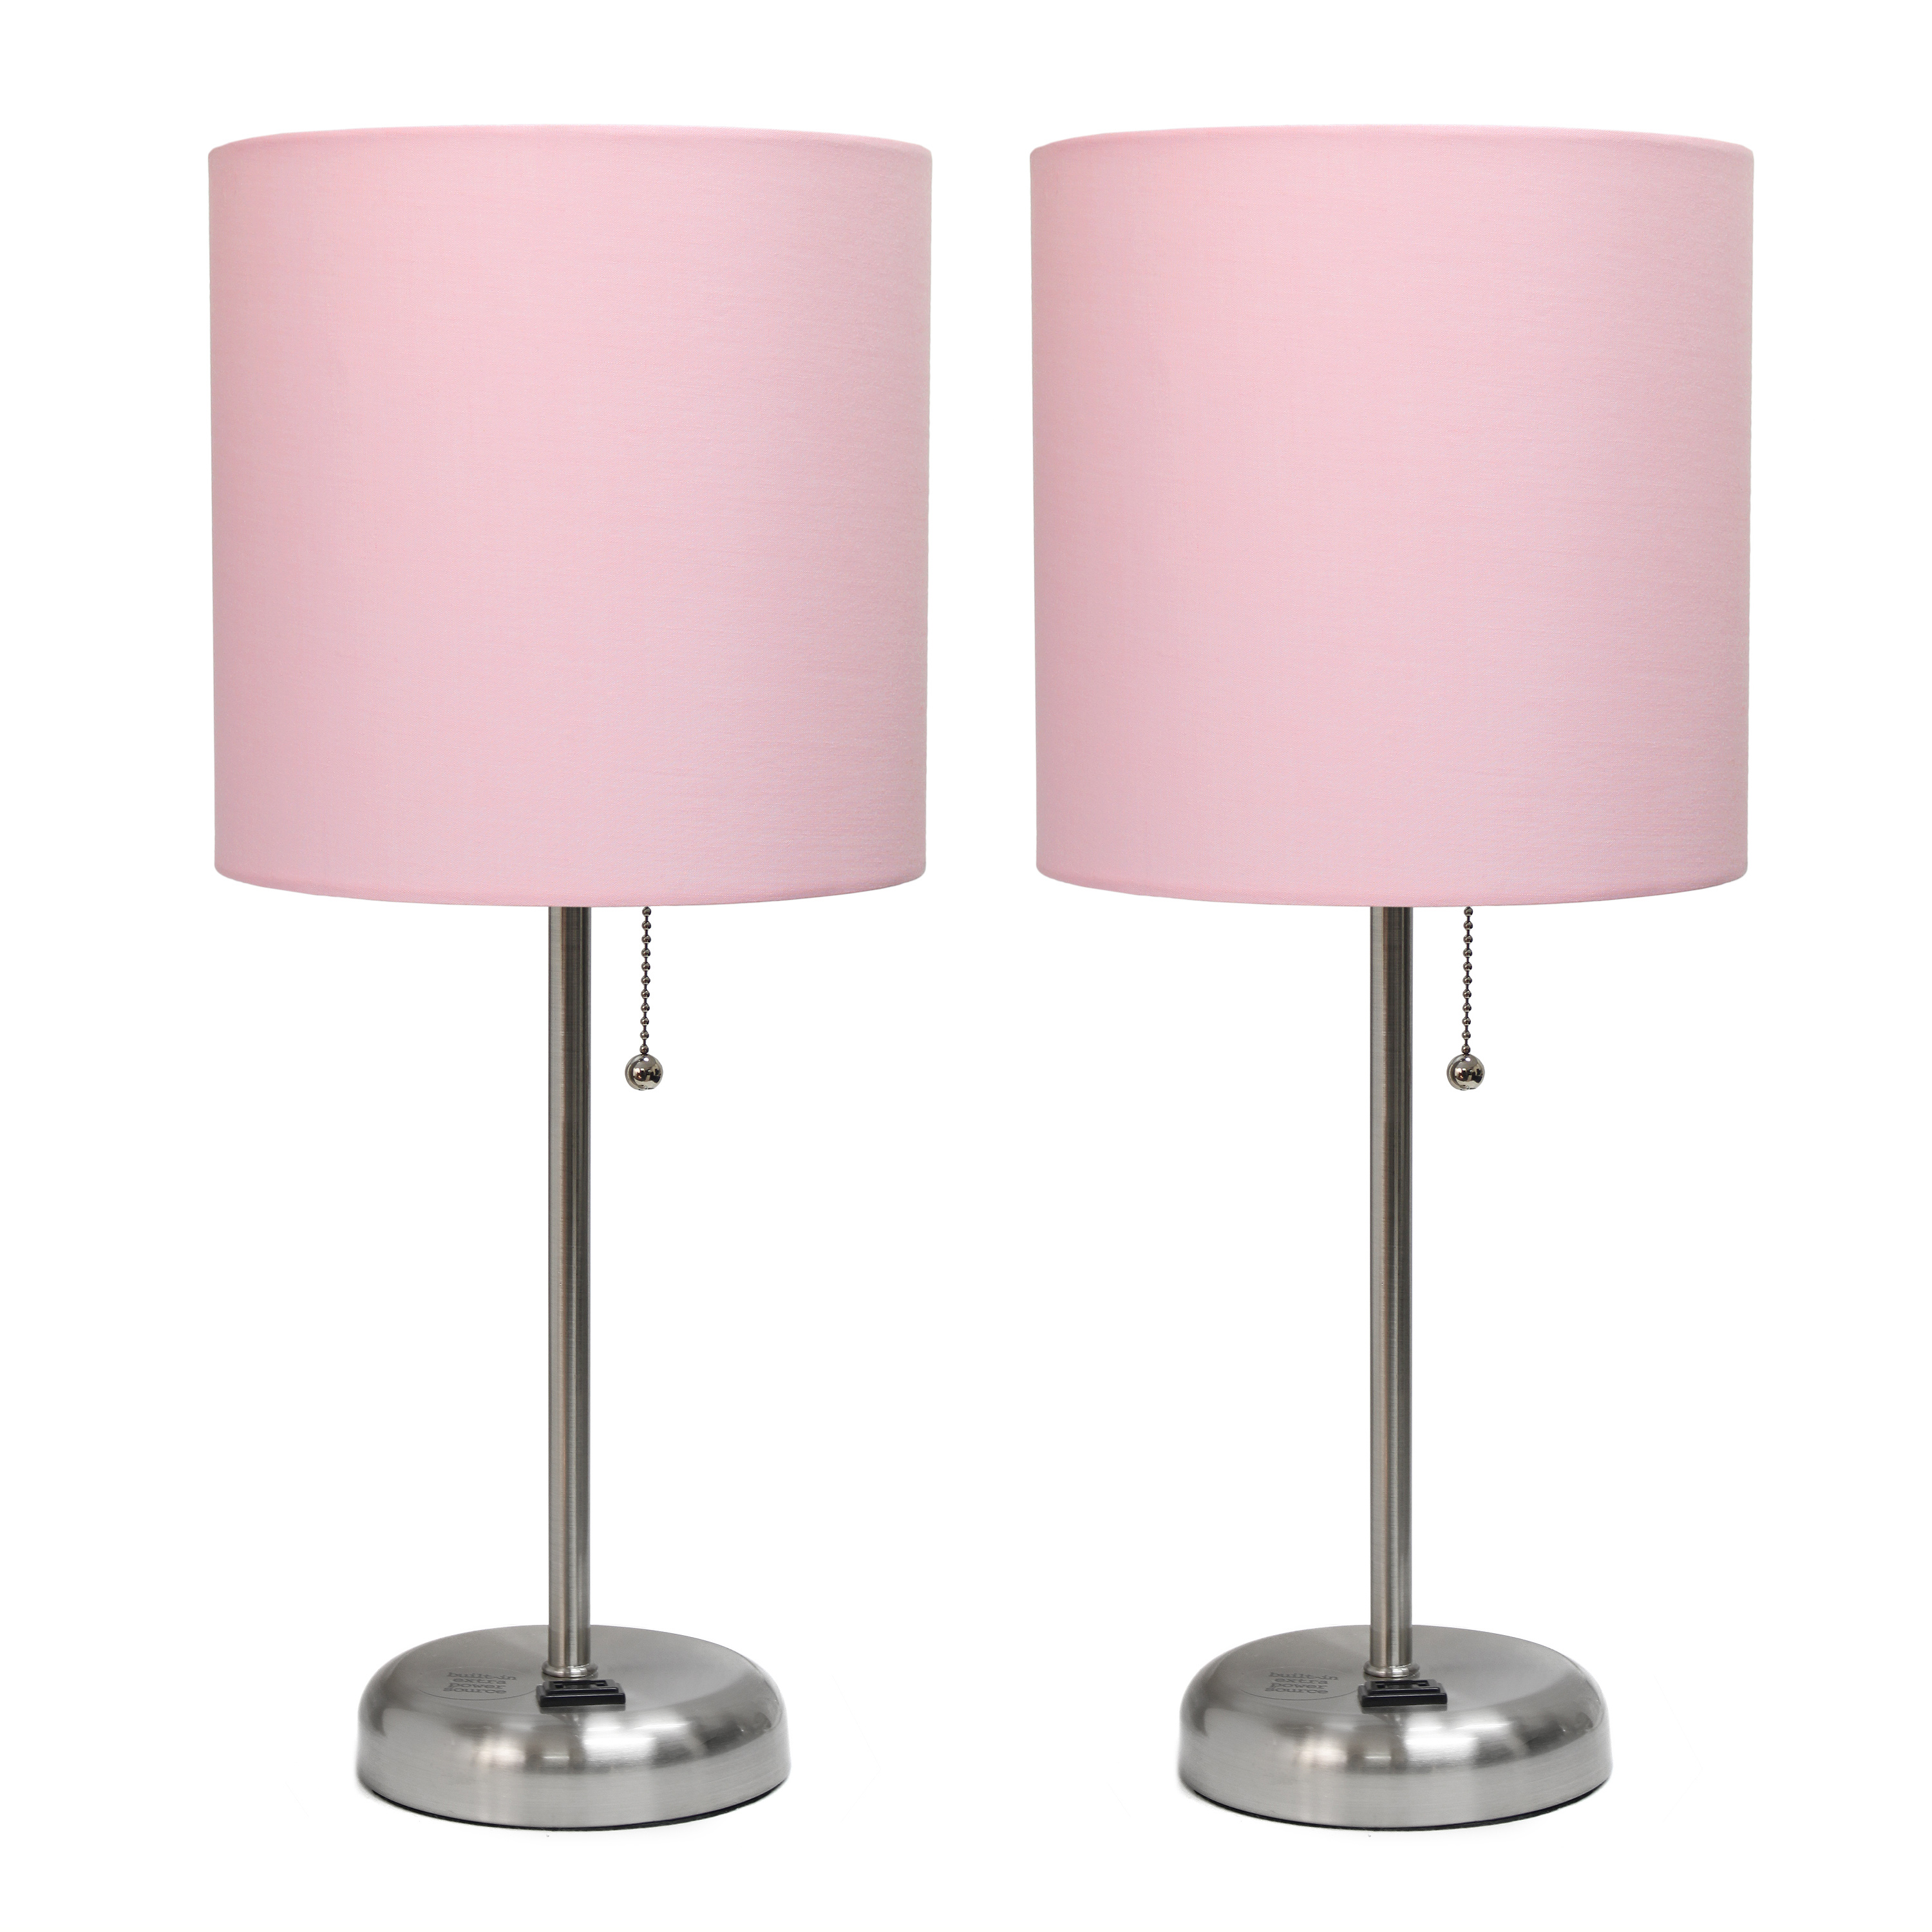 LimeLights Brushed Steel Stick Lamp with Charging Outlet and Fabric Shade 2 Pack Set, Pink